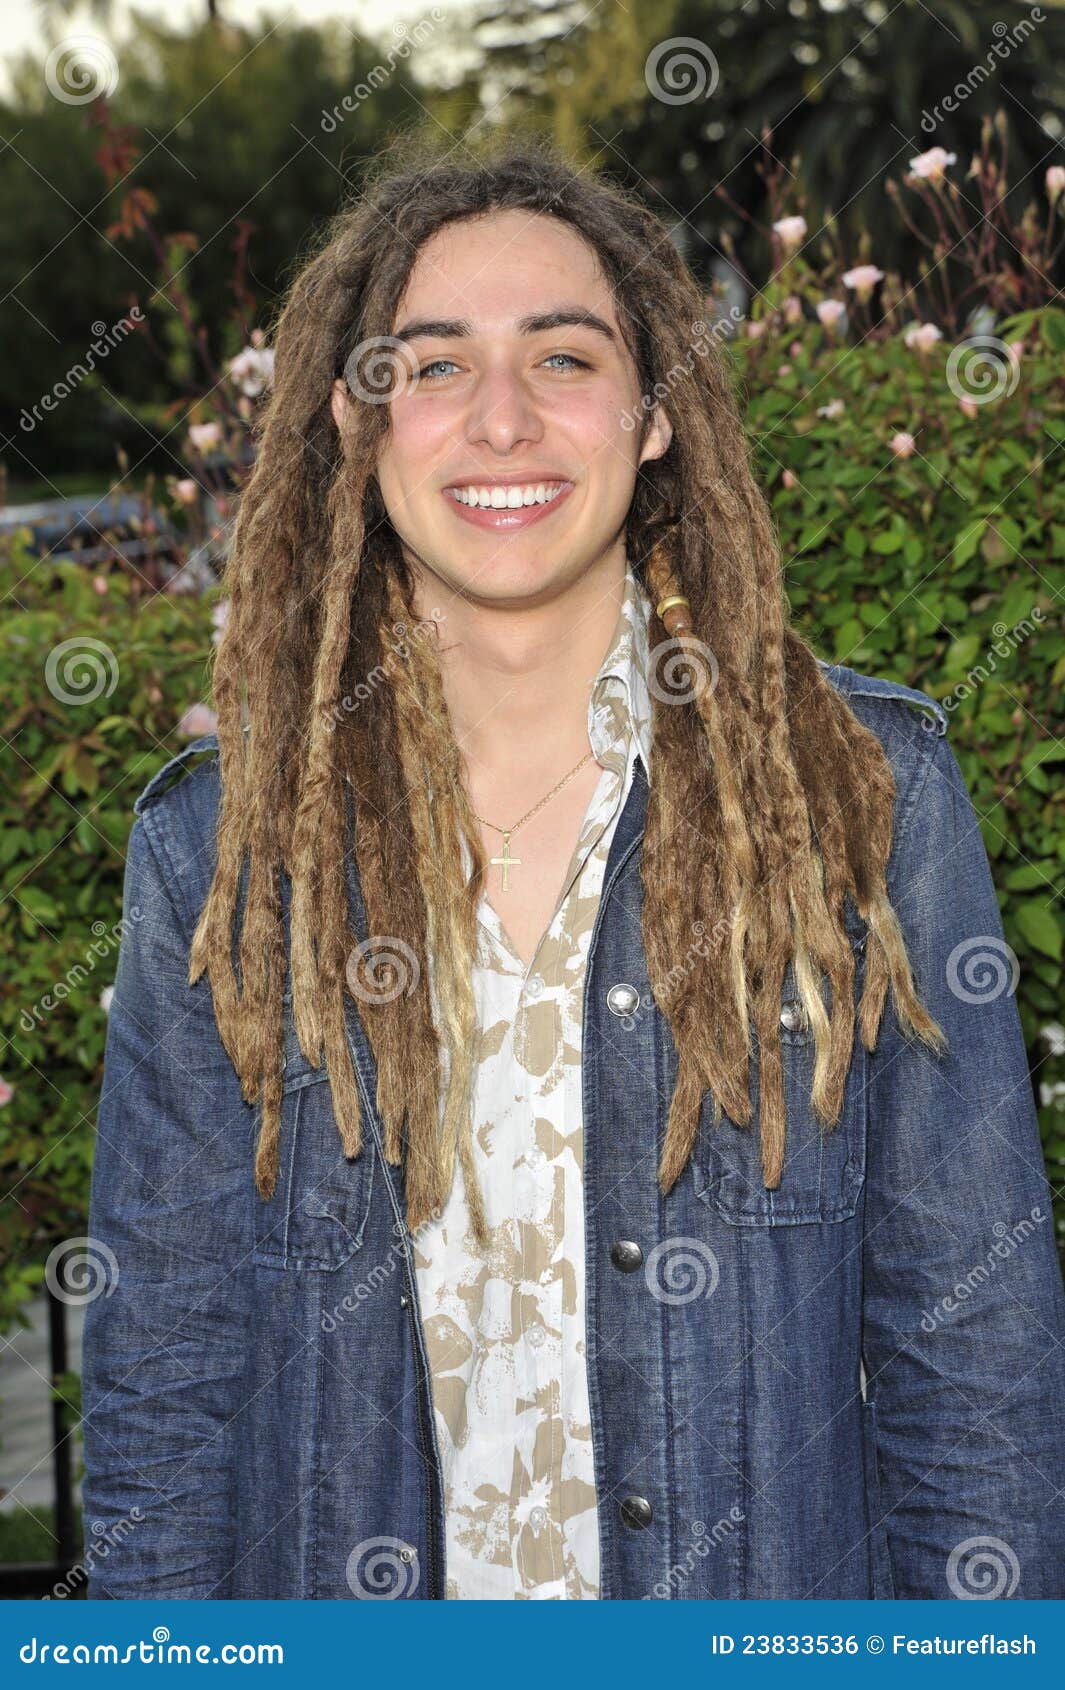 Jason Castro Rise To You Download